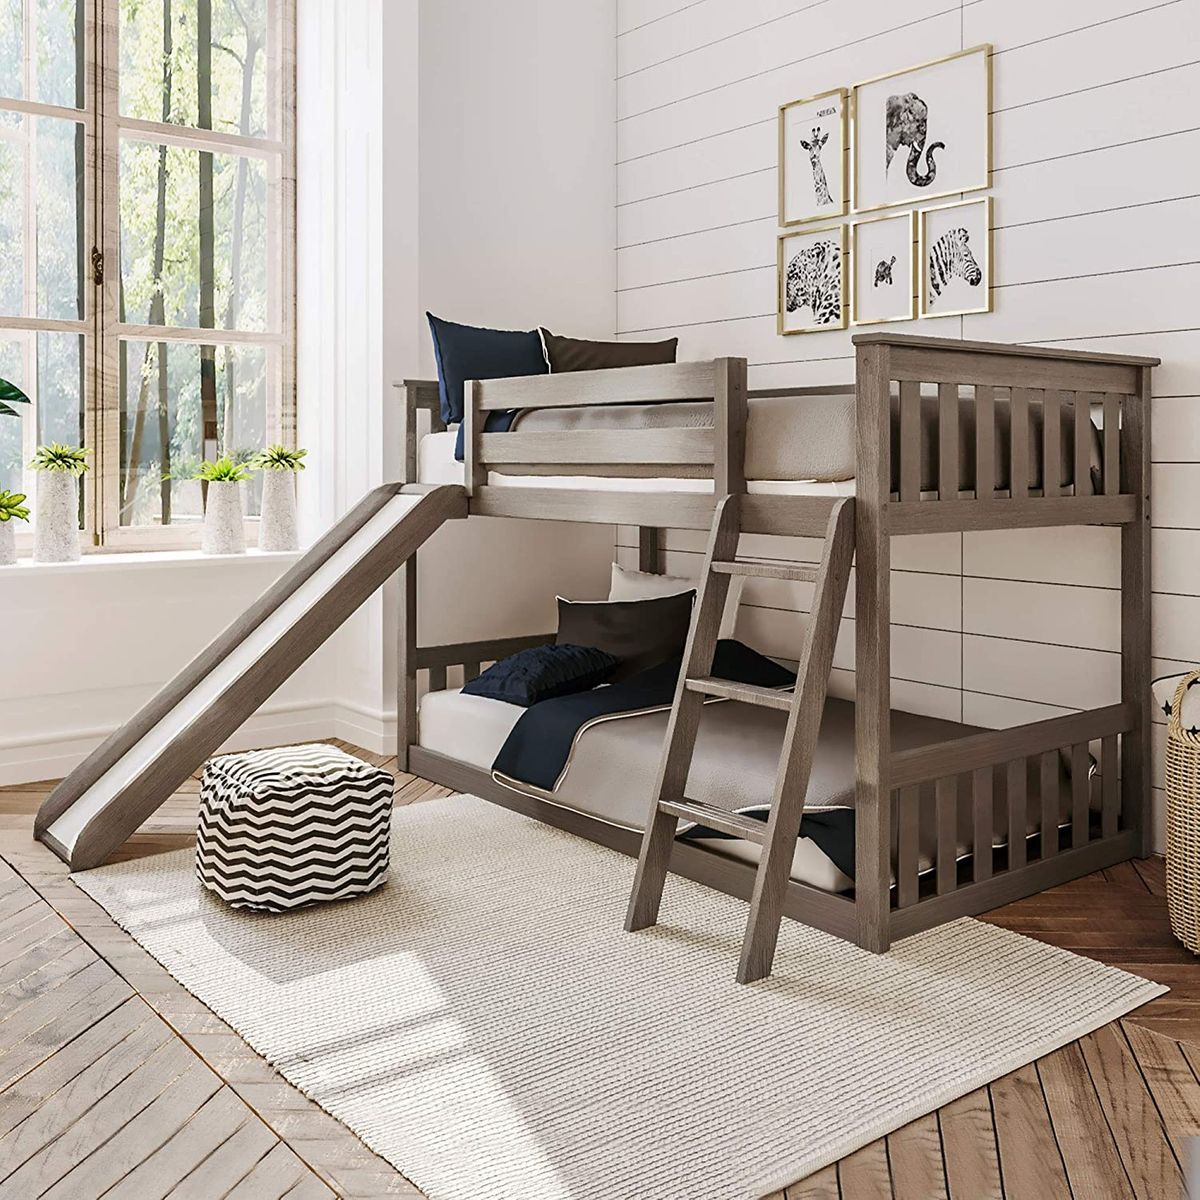 8 Best Bunk Beds 2020 The Strategist, Twin Size Bunk Beds